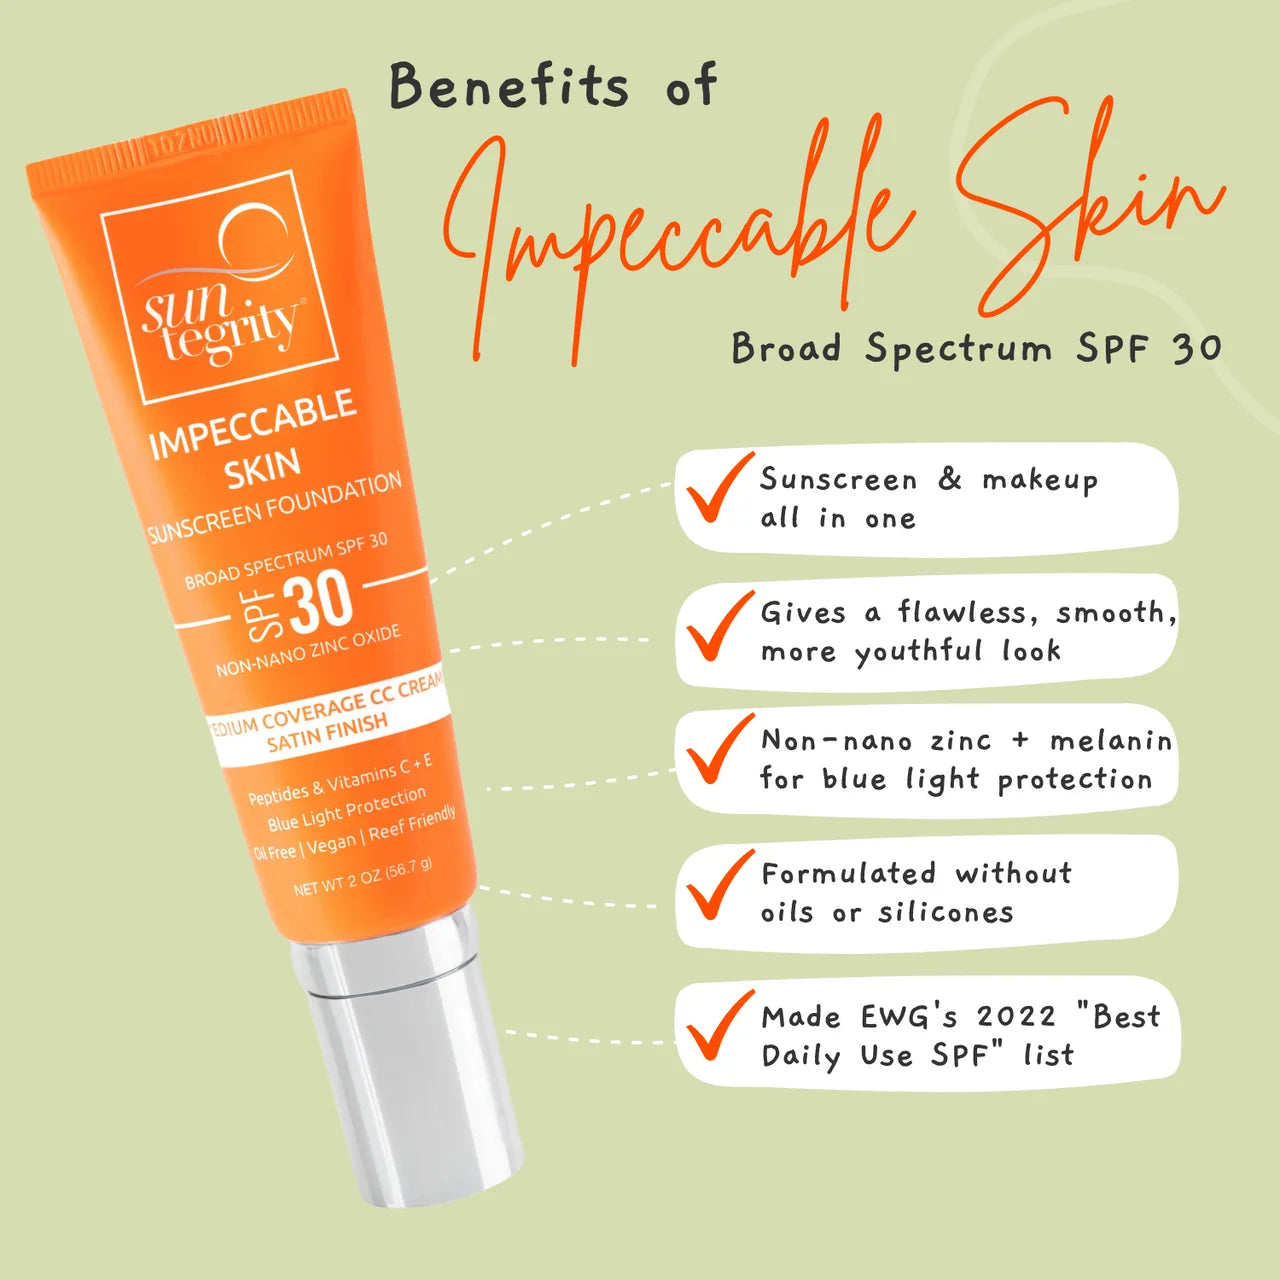 Sun tegrity impeccable skin info points